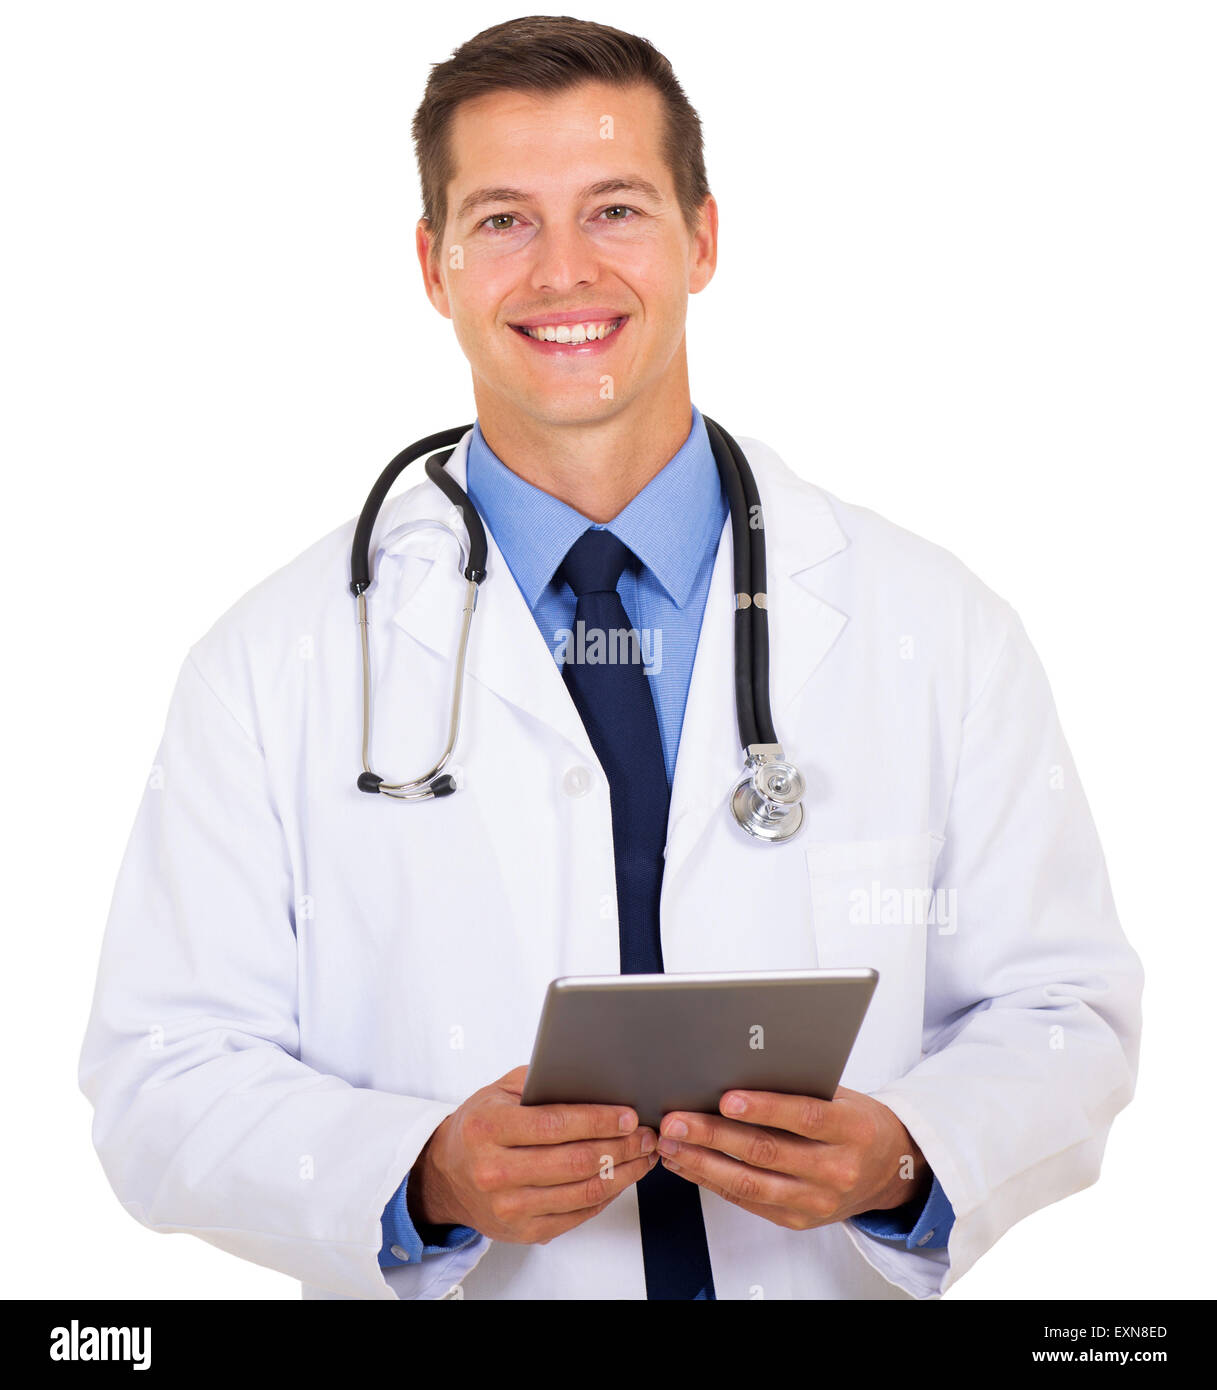 modern young doctor holding tablet computer Stock Photo